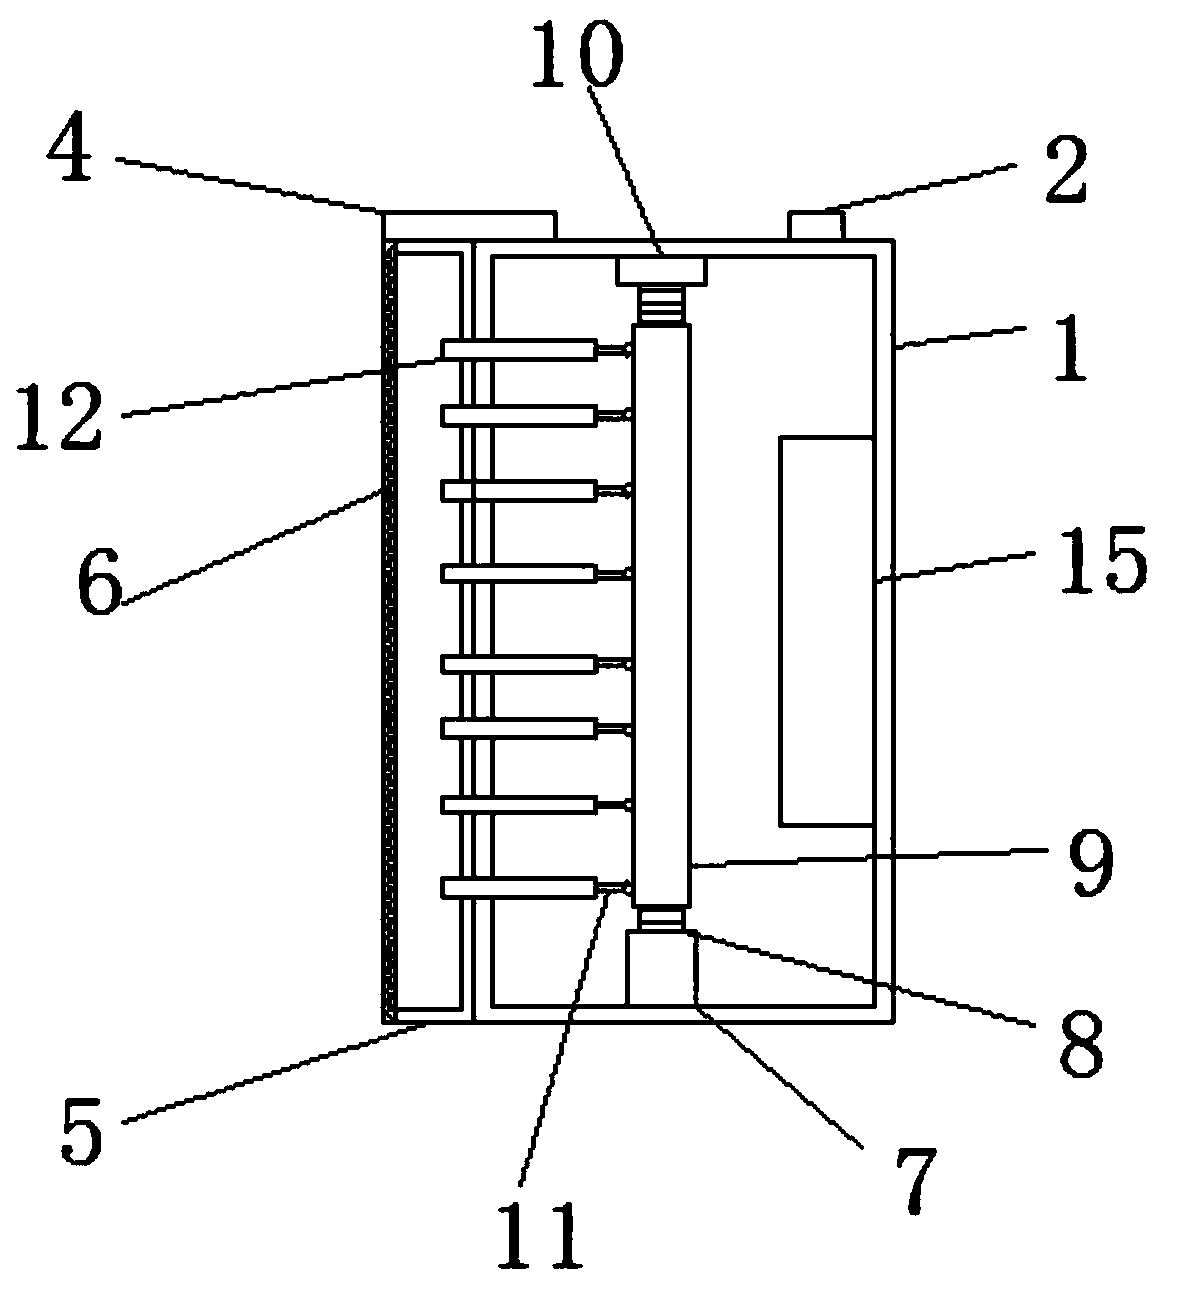 Heat dissipation device of reinforced computer